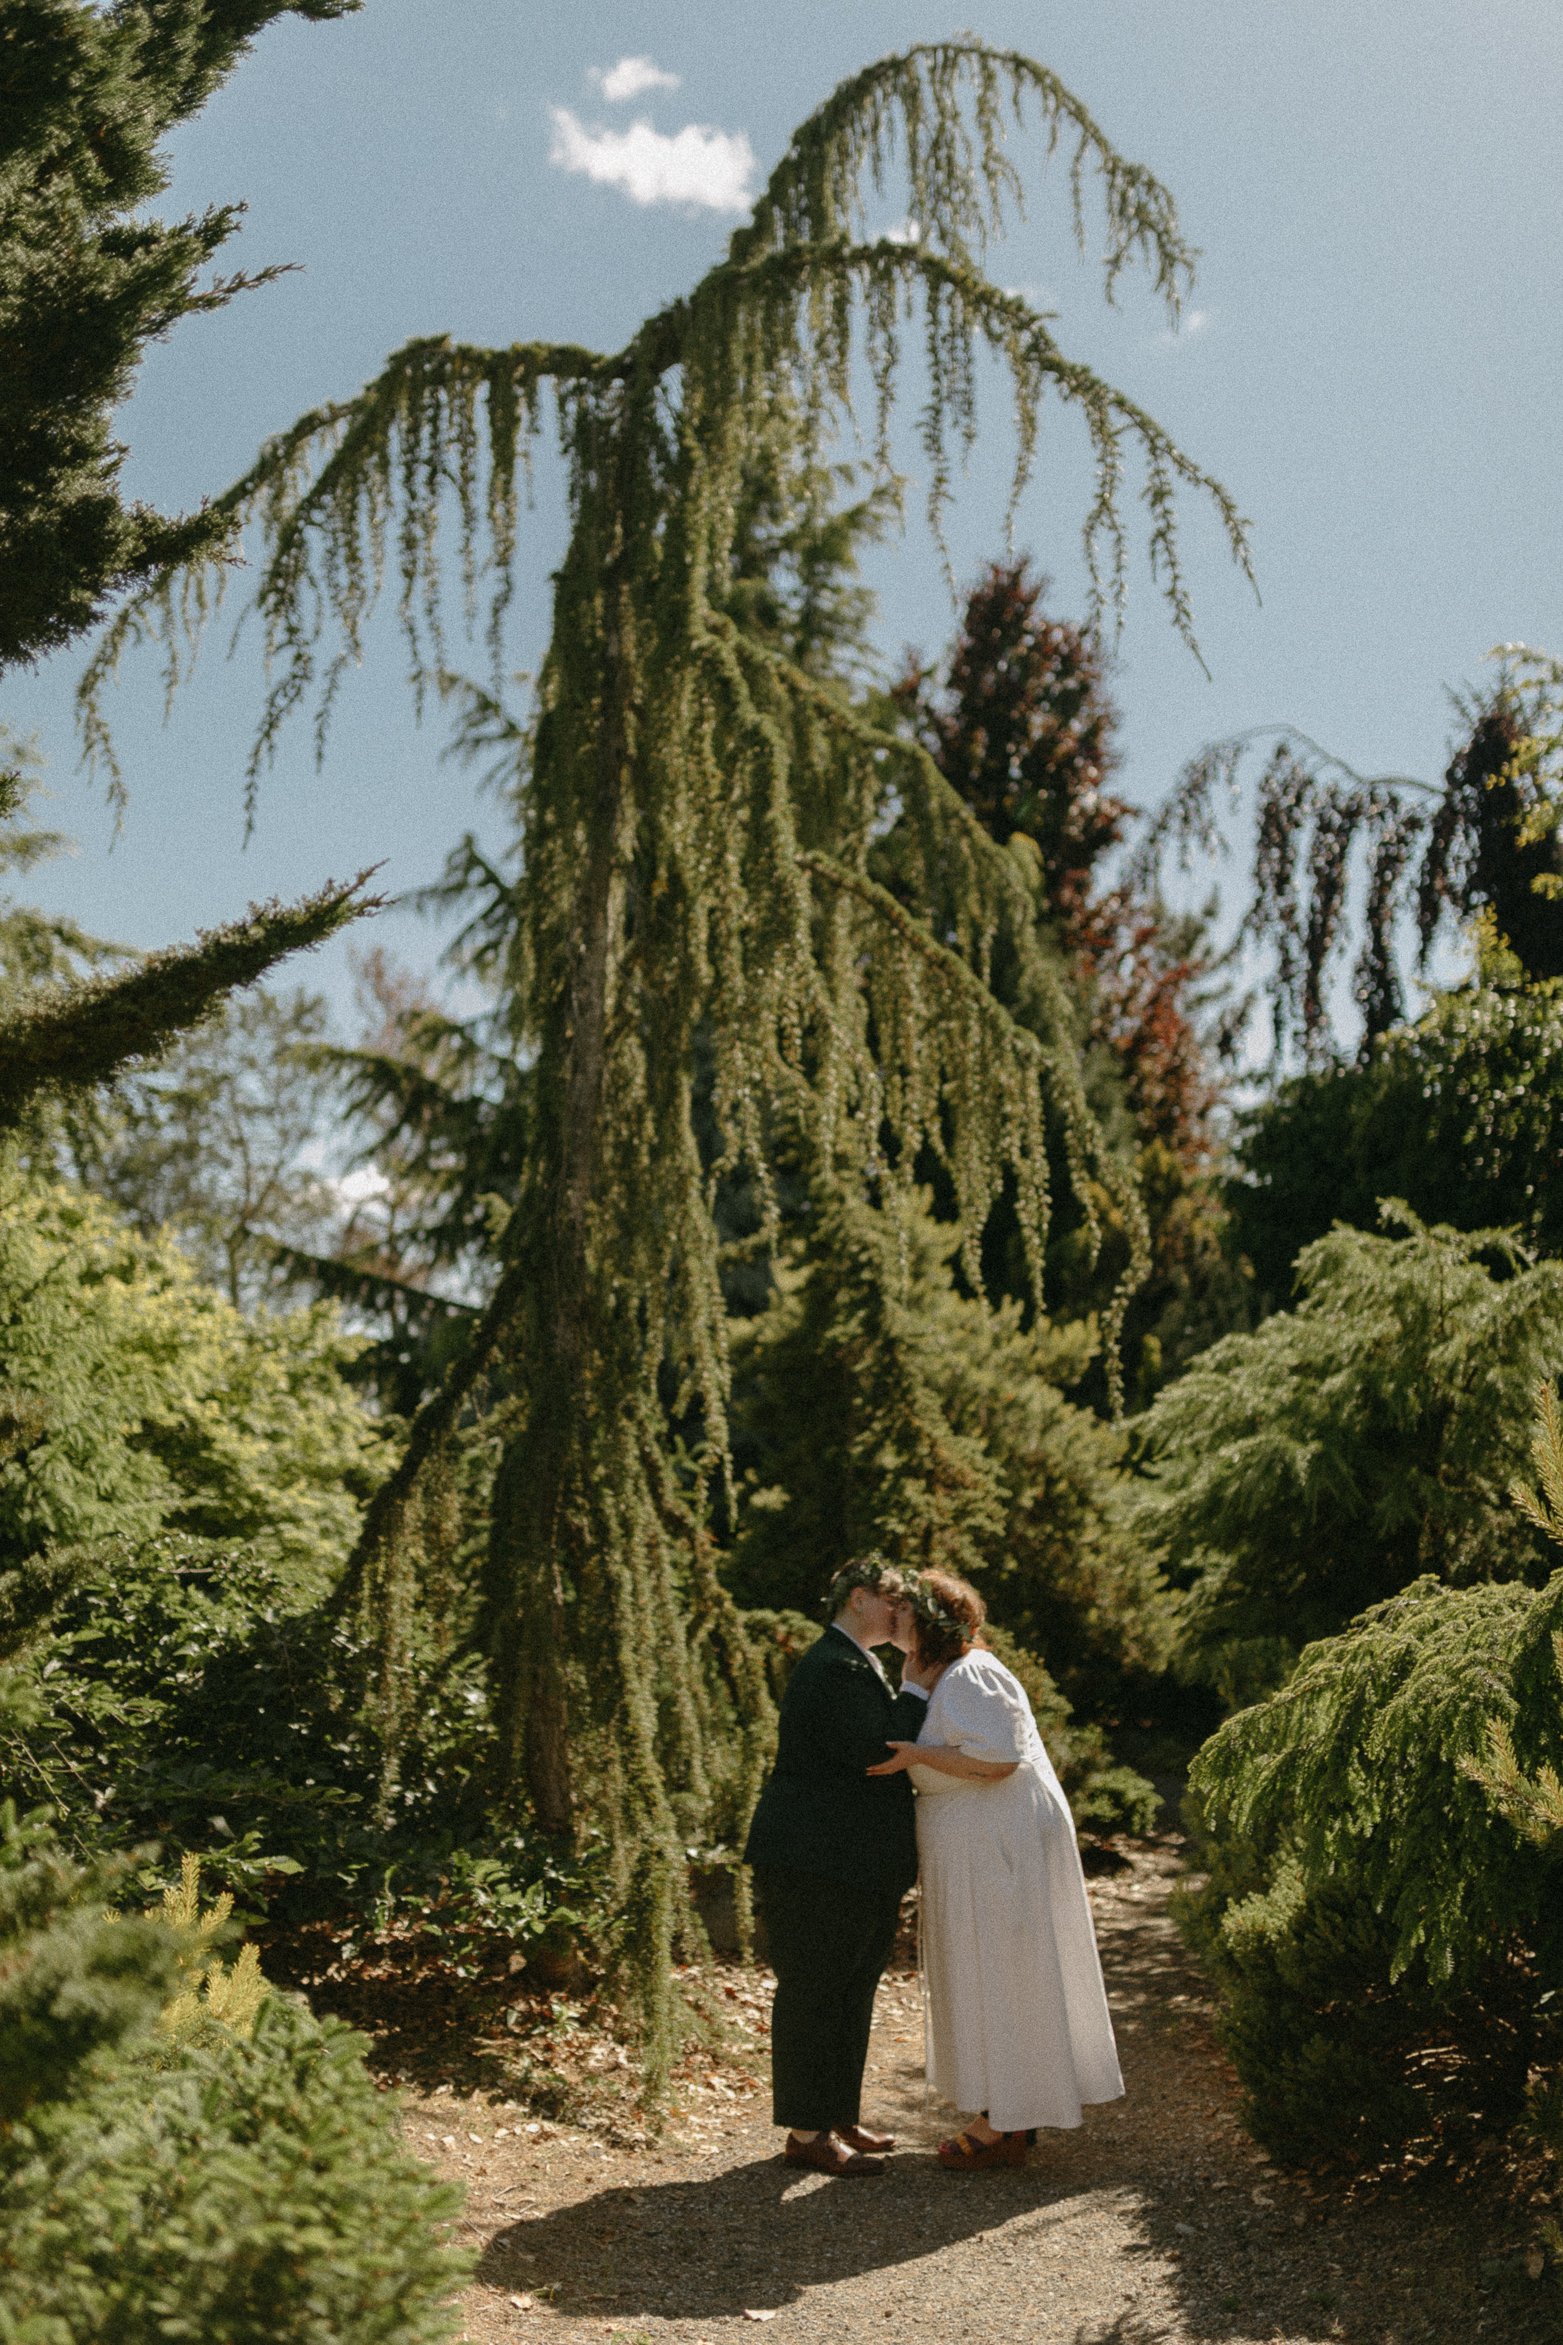 sunsoaked-queer-seattle-washington-arboretum-rose-garden-lqbtq-wedding-by-genderqueer-tacoma-elopement-photographer-halle-roland-photography-39.jpg